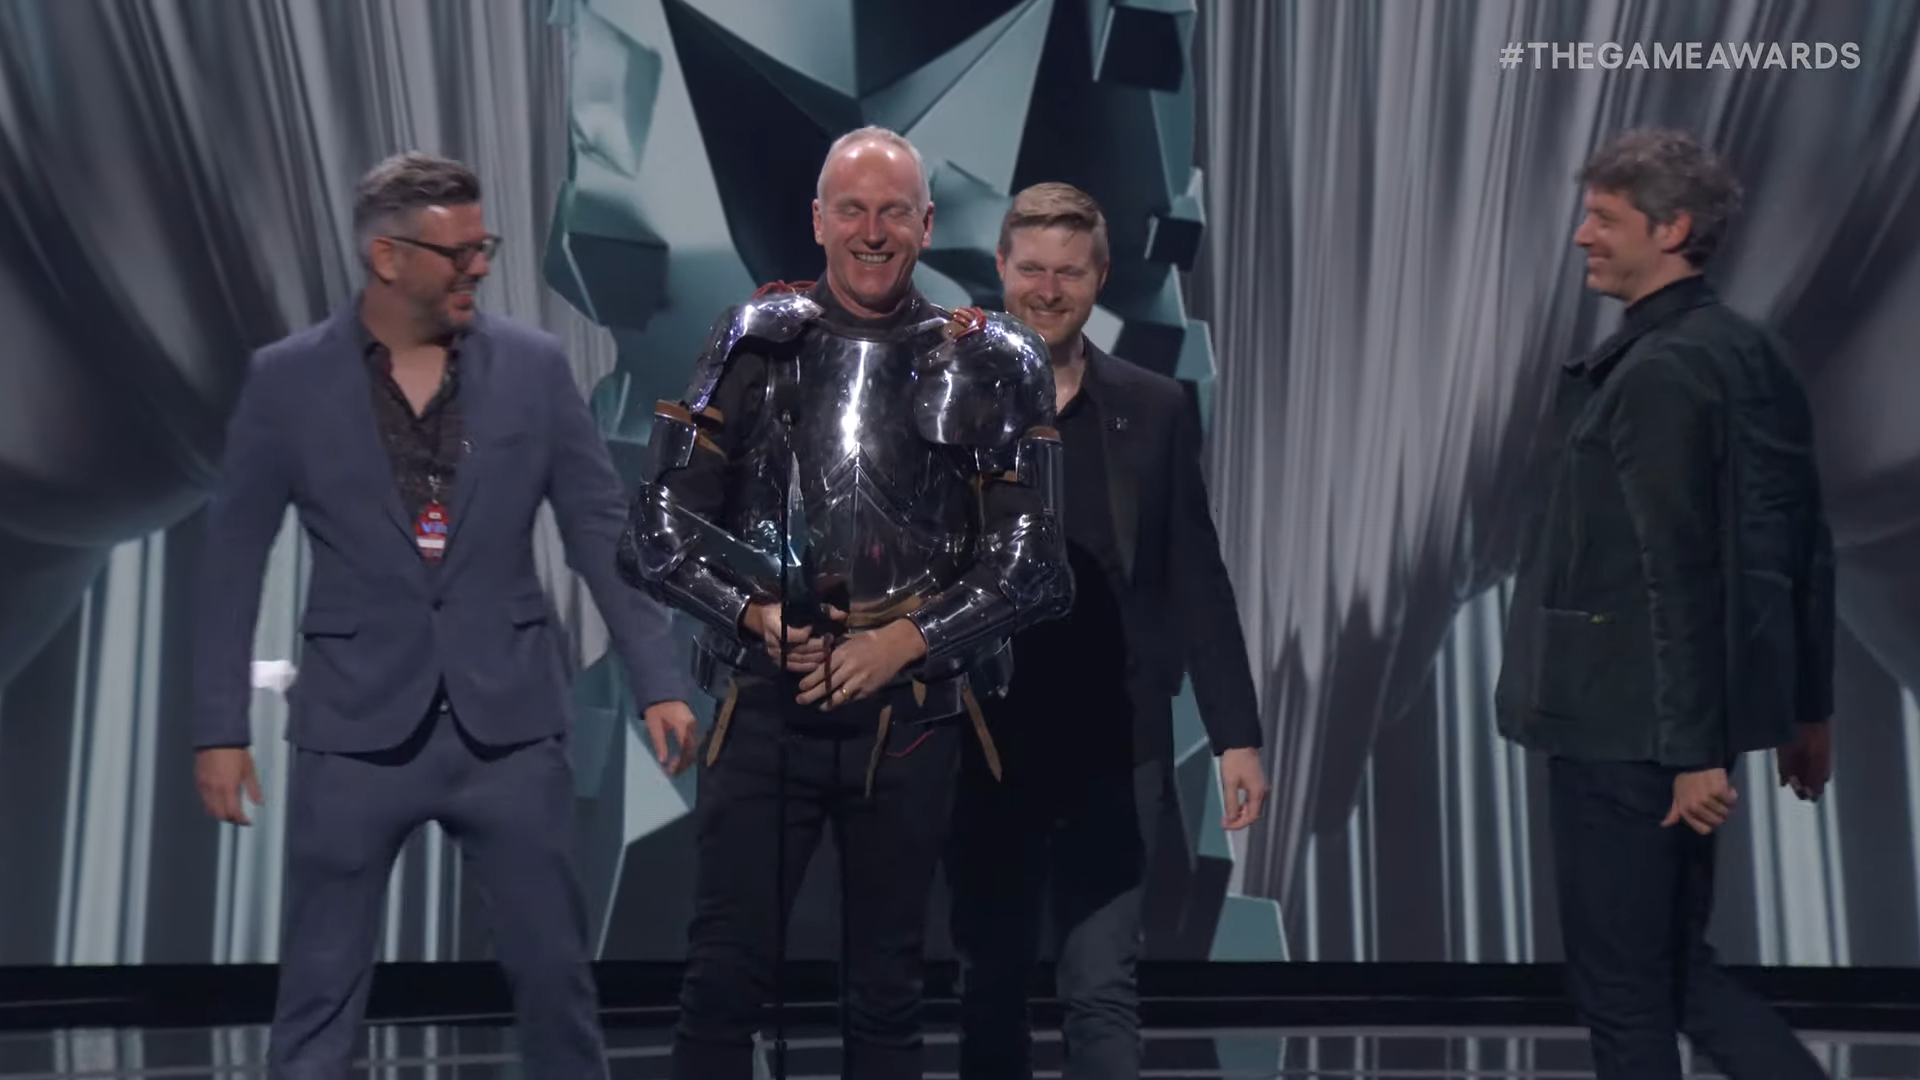 Swen Vincke accepts The Game Awards GOTY for Baldur's Gate 3 in plate  armor: "I didn't expect it" | GamesRadar+